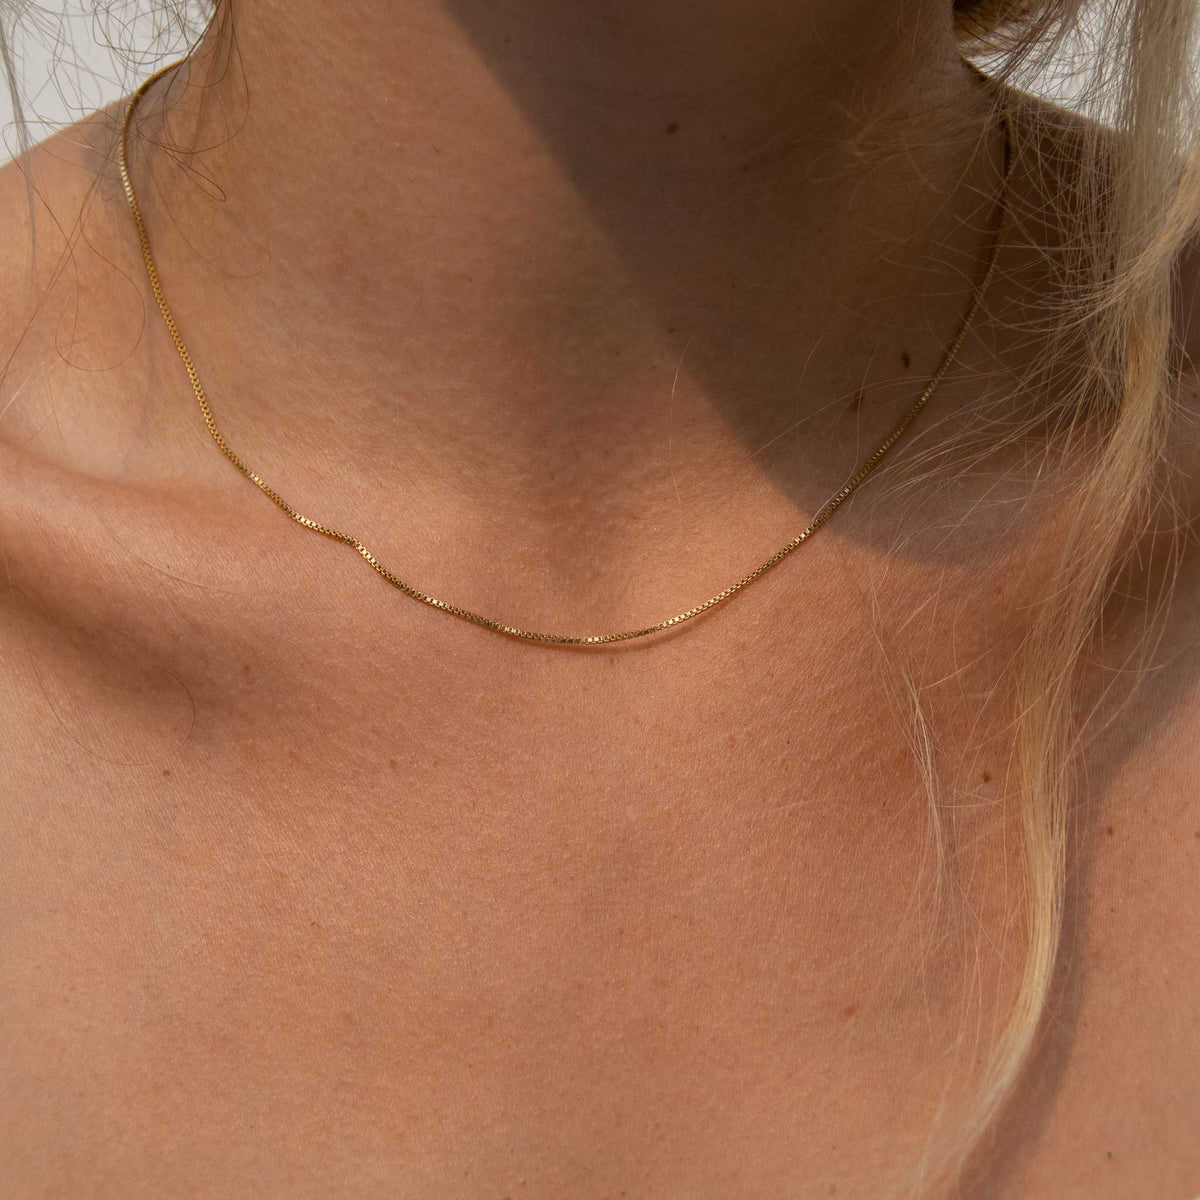 Close up of the necklace with piece of hair hanging down and a shadow from face on the right side of the image.